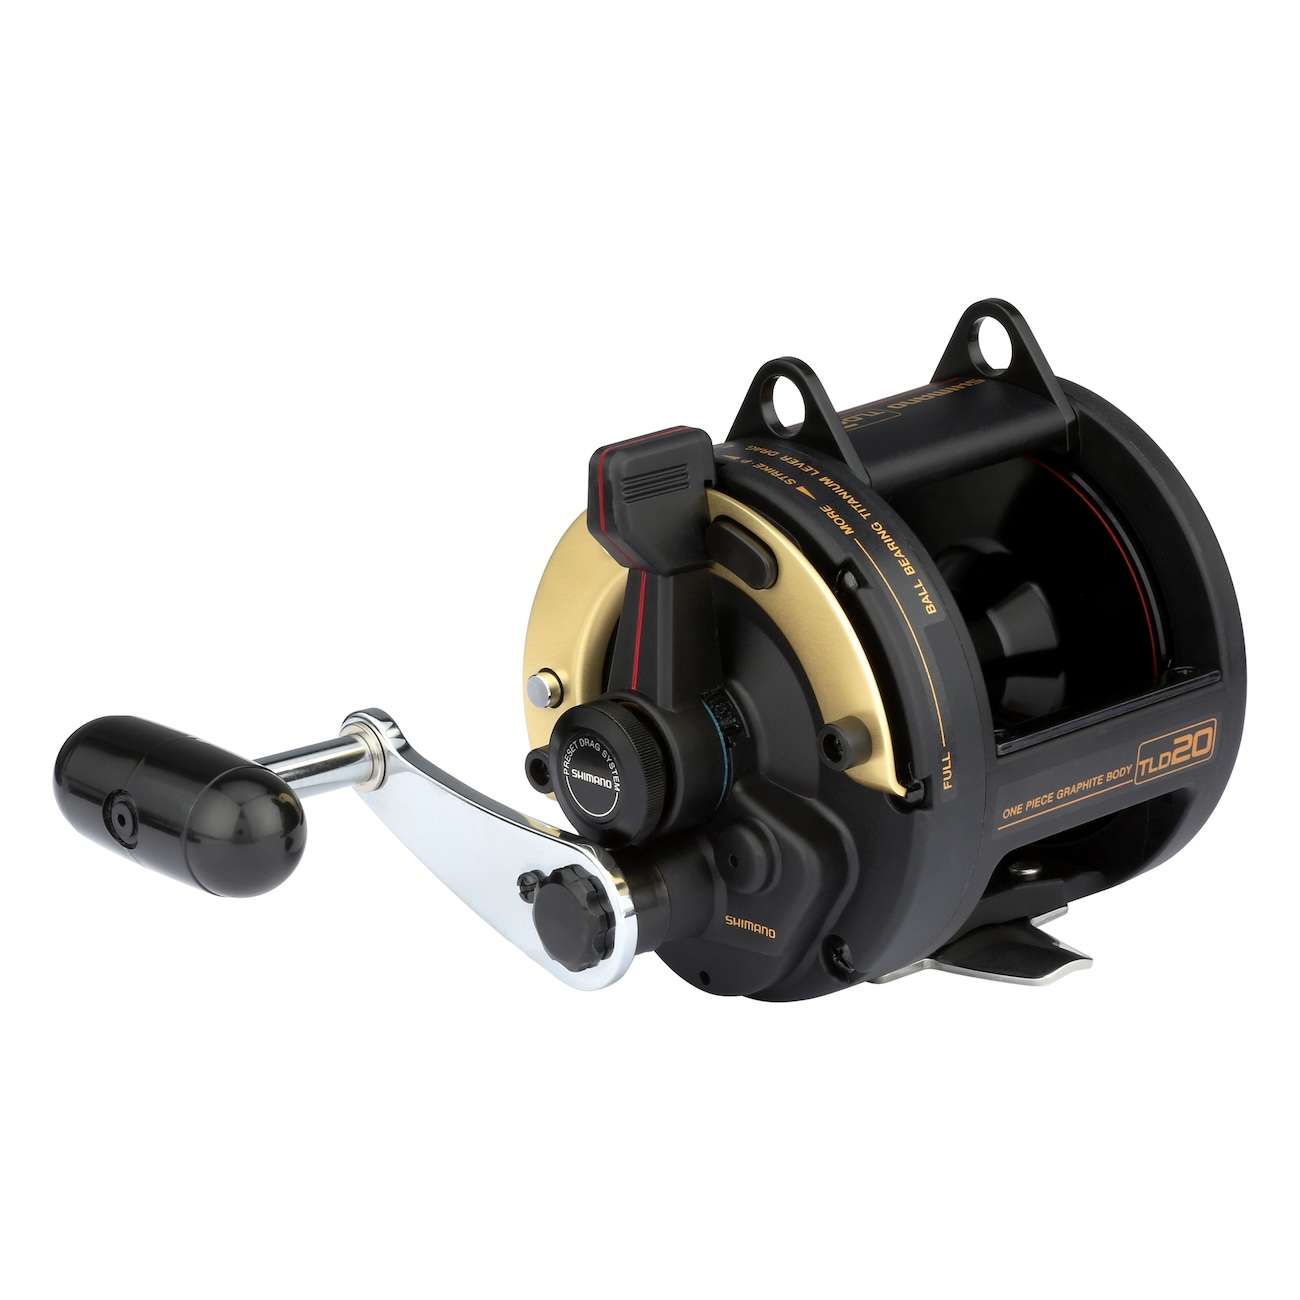 Daiwa SealineX HSV50 casting reel review, fishing for stripers